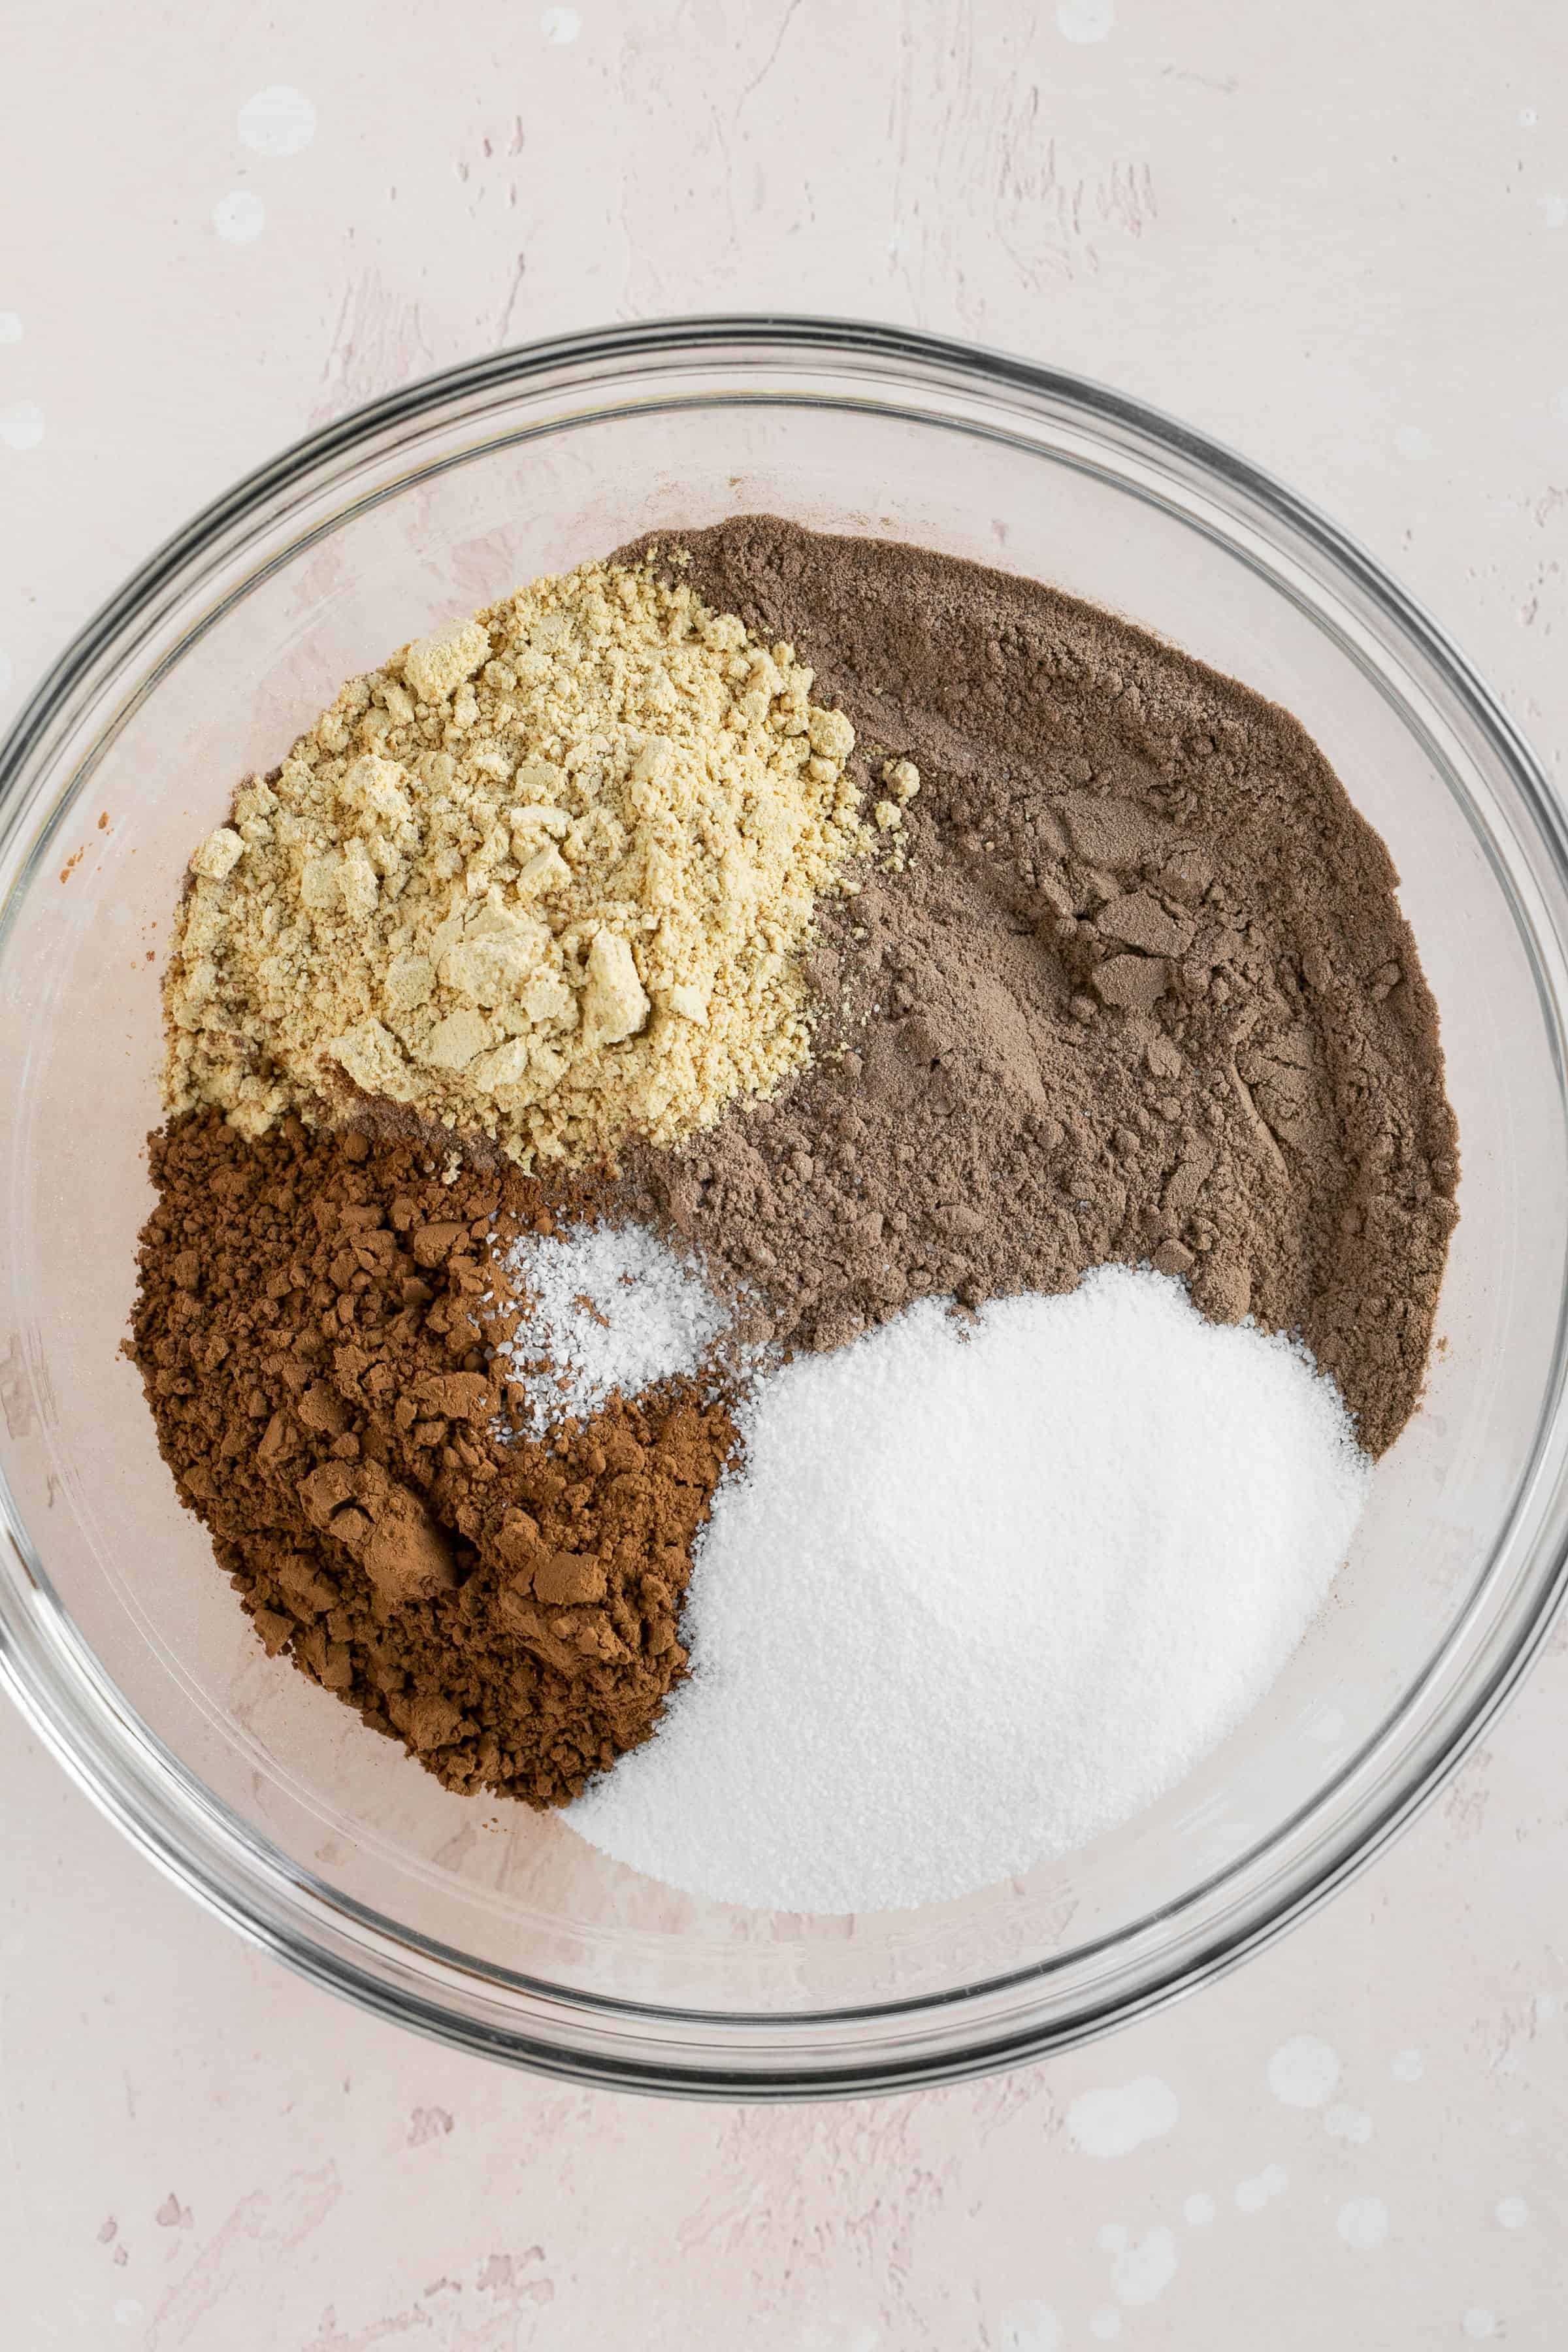 Dry ingredients for healthy brownie batter in a bowl.